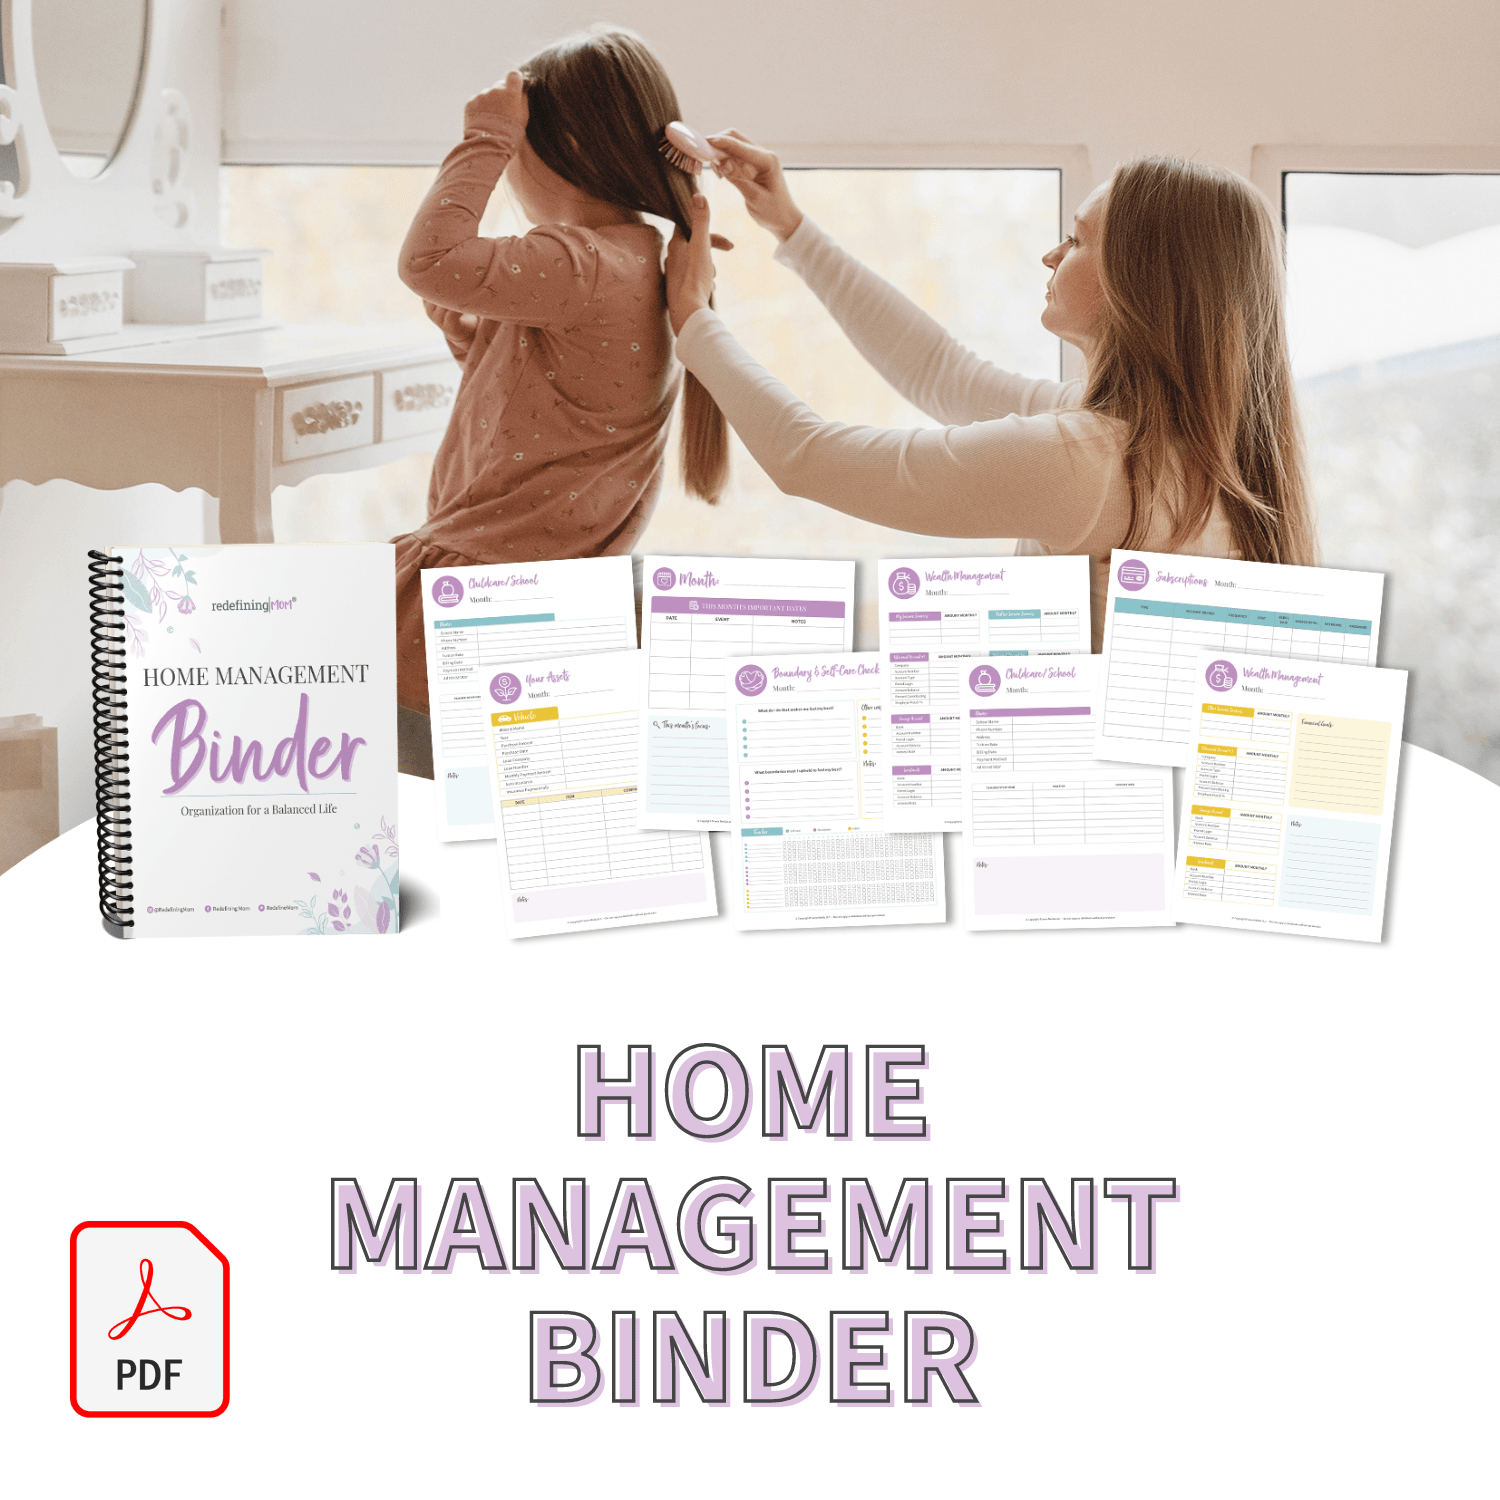 The best home management binder for getting your life in order and organizing your home! Comes in a fillable PDF format.